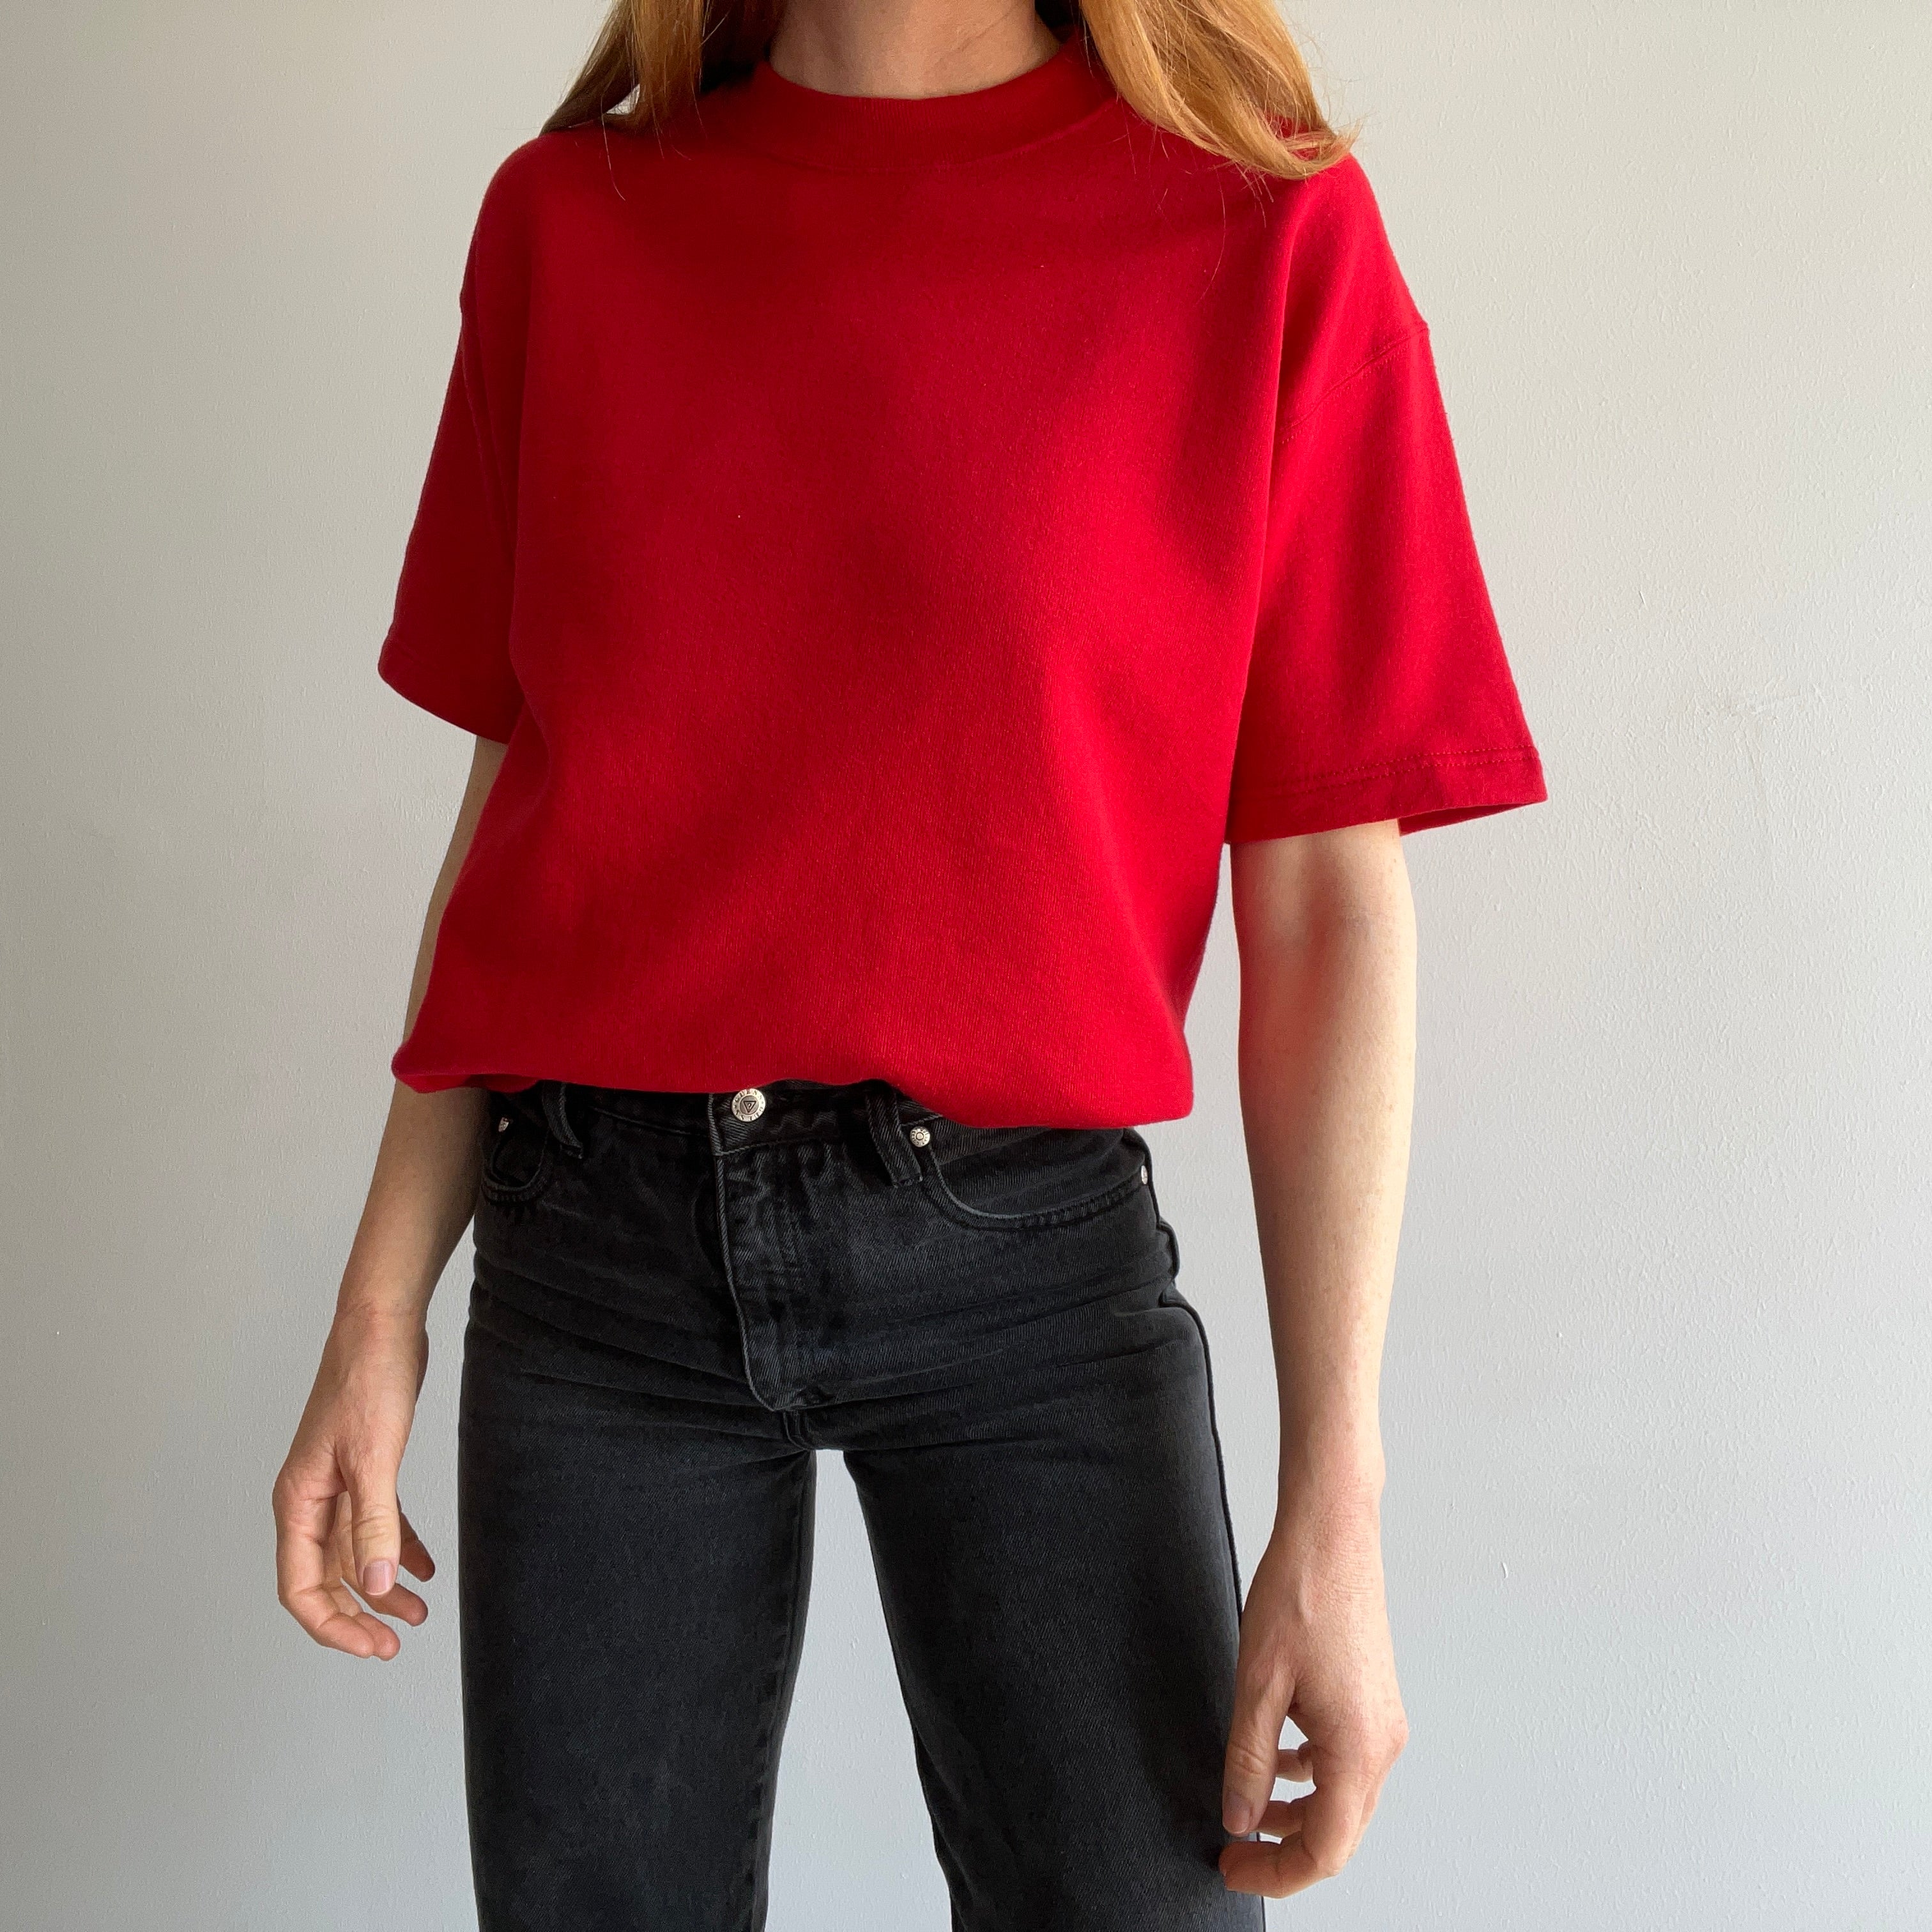 1980/90s Blank Red Warm Up T-Shirt Sweatshirt by Jerzees